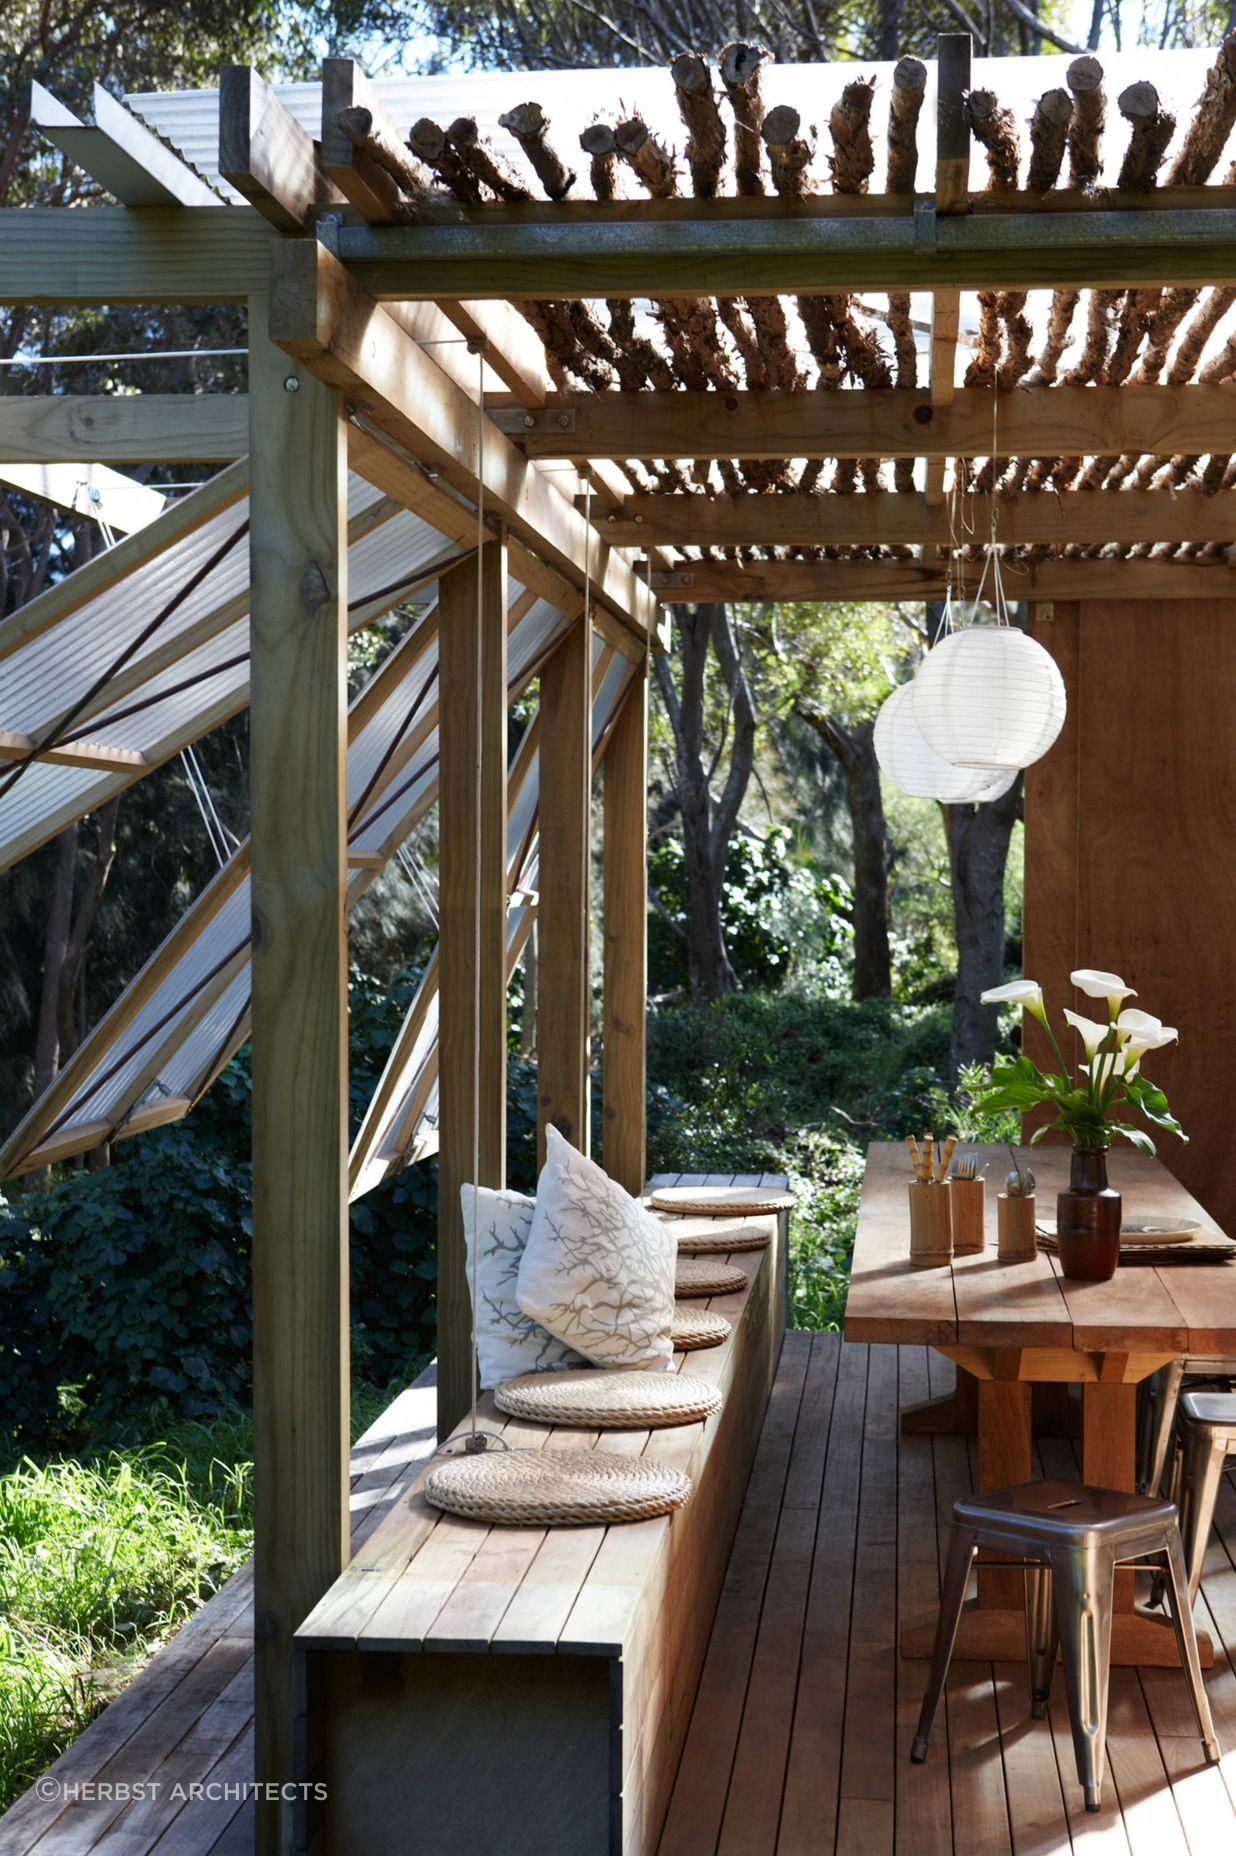 Wetland Folly, Great Barrier Island, by Herbst Architects.